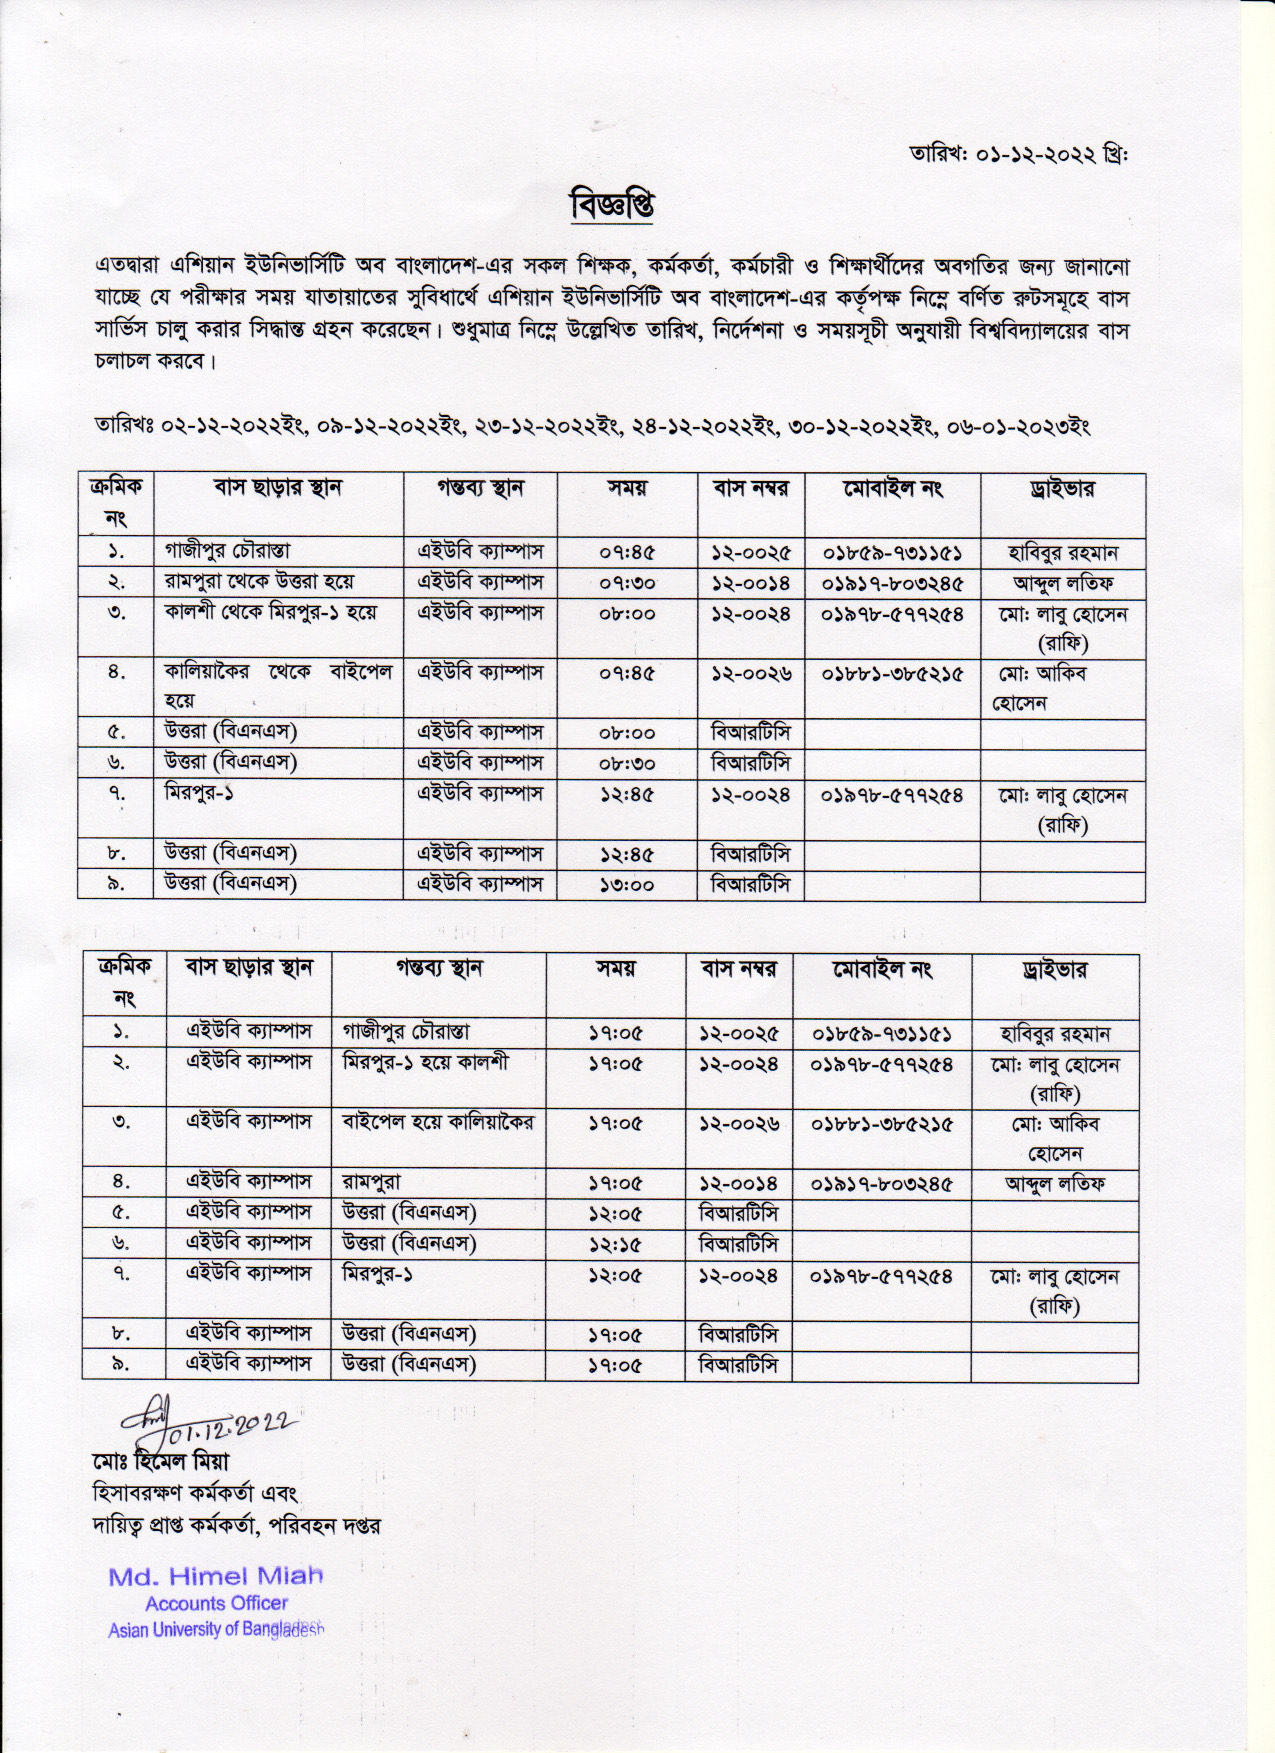 Bus Schedule for Examination image